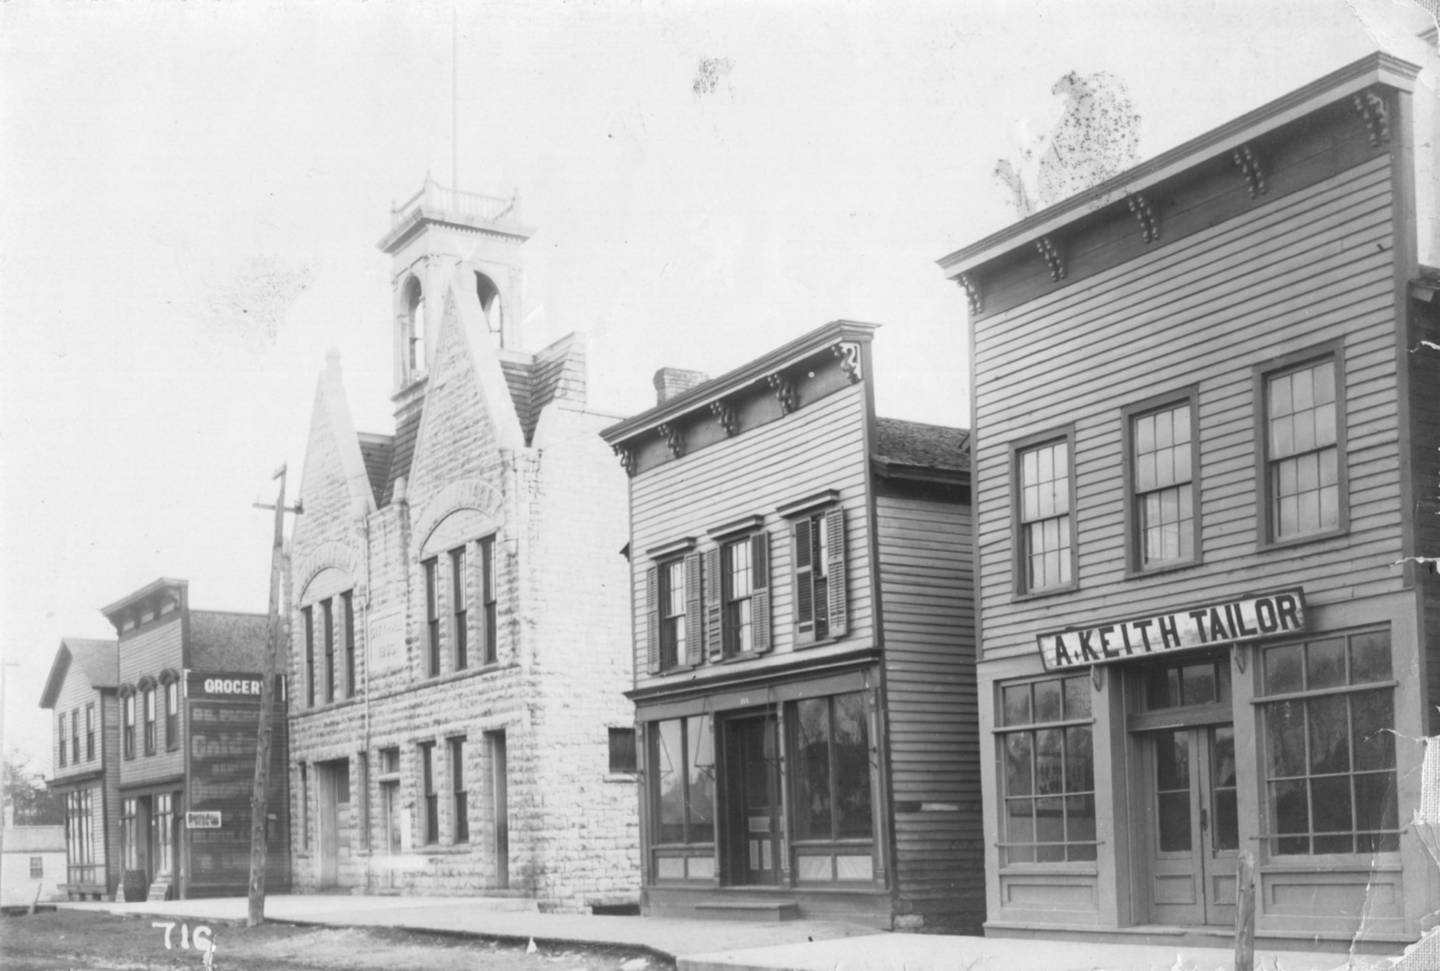 The village of Lemont is celebrating its 150th anniversary this week, with the culmination of the celebration on Friday and Saturday. Pictured is a street view of Lemont as seen in the 1890s.